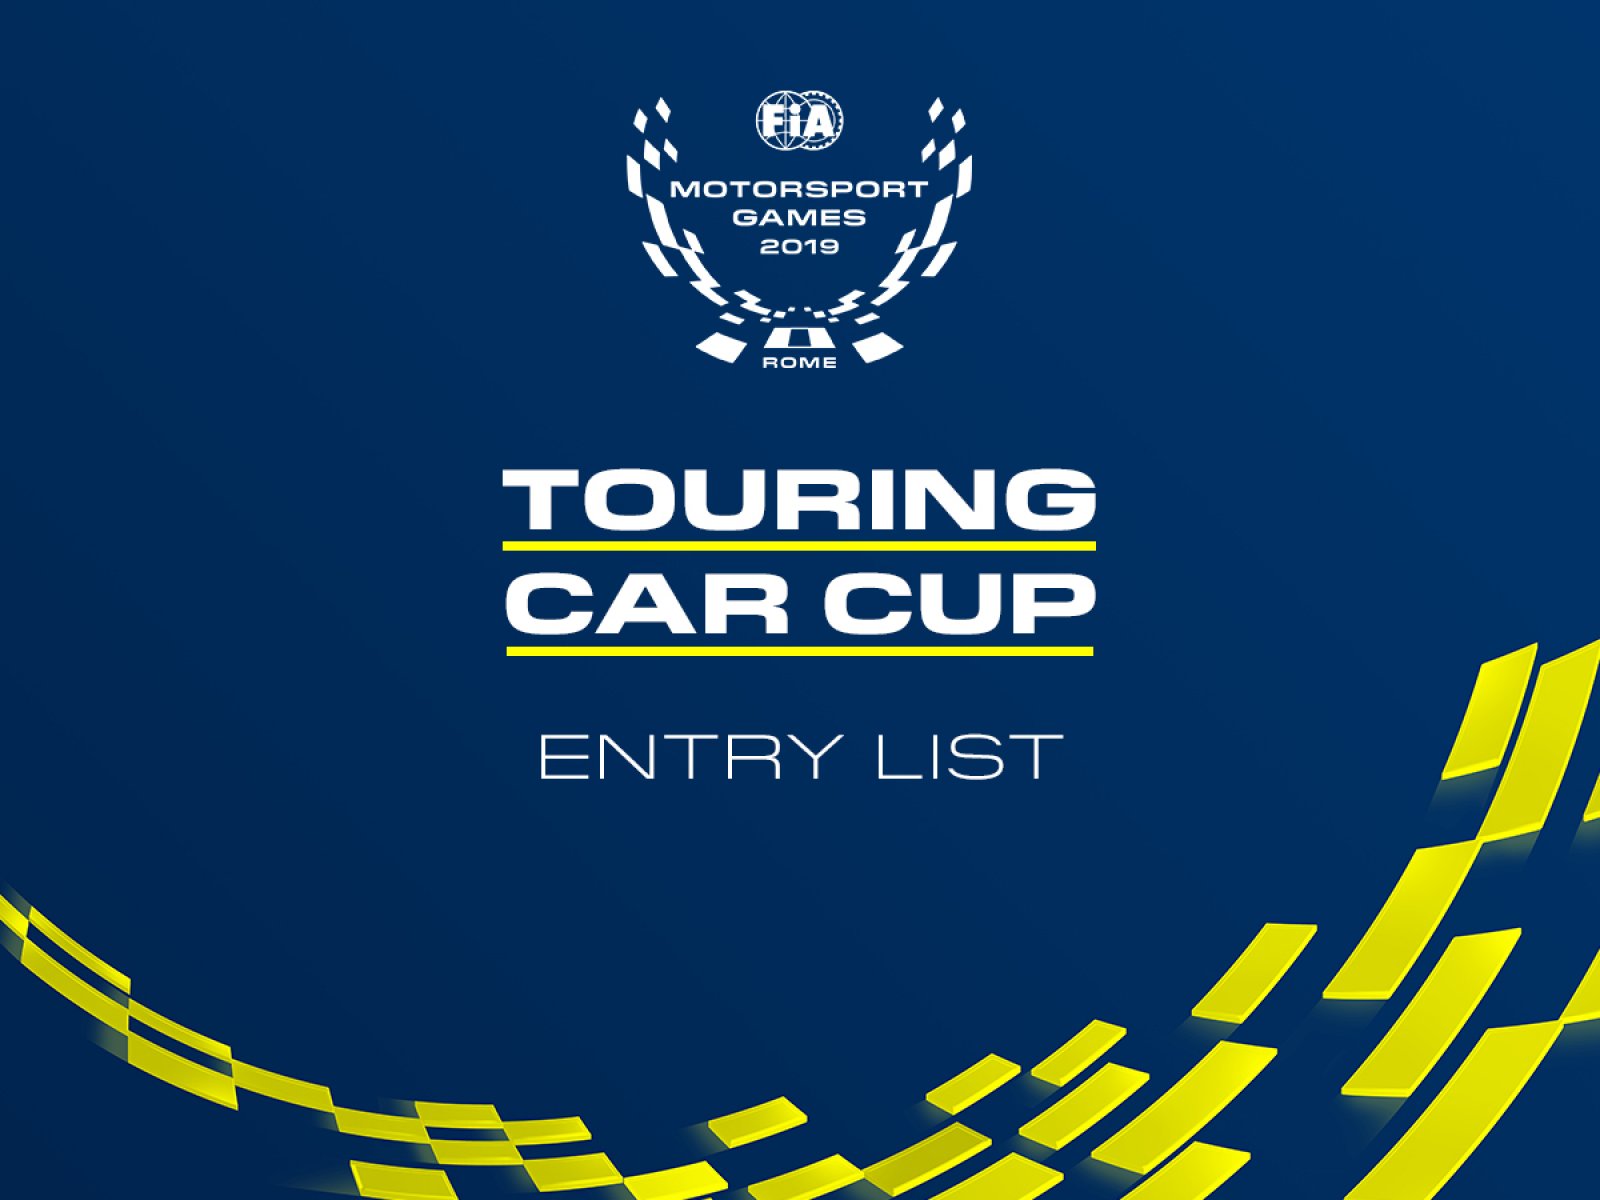 20 Touring Car Cup entries confirmed for FIA Motorsport Games